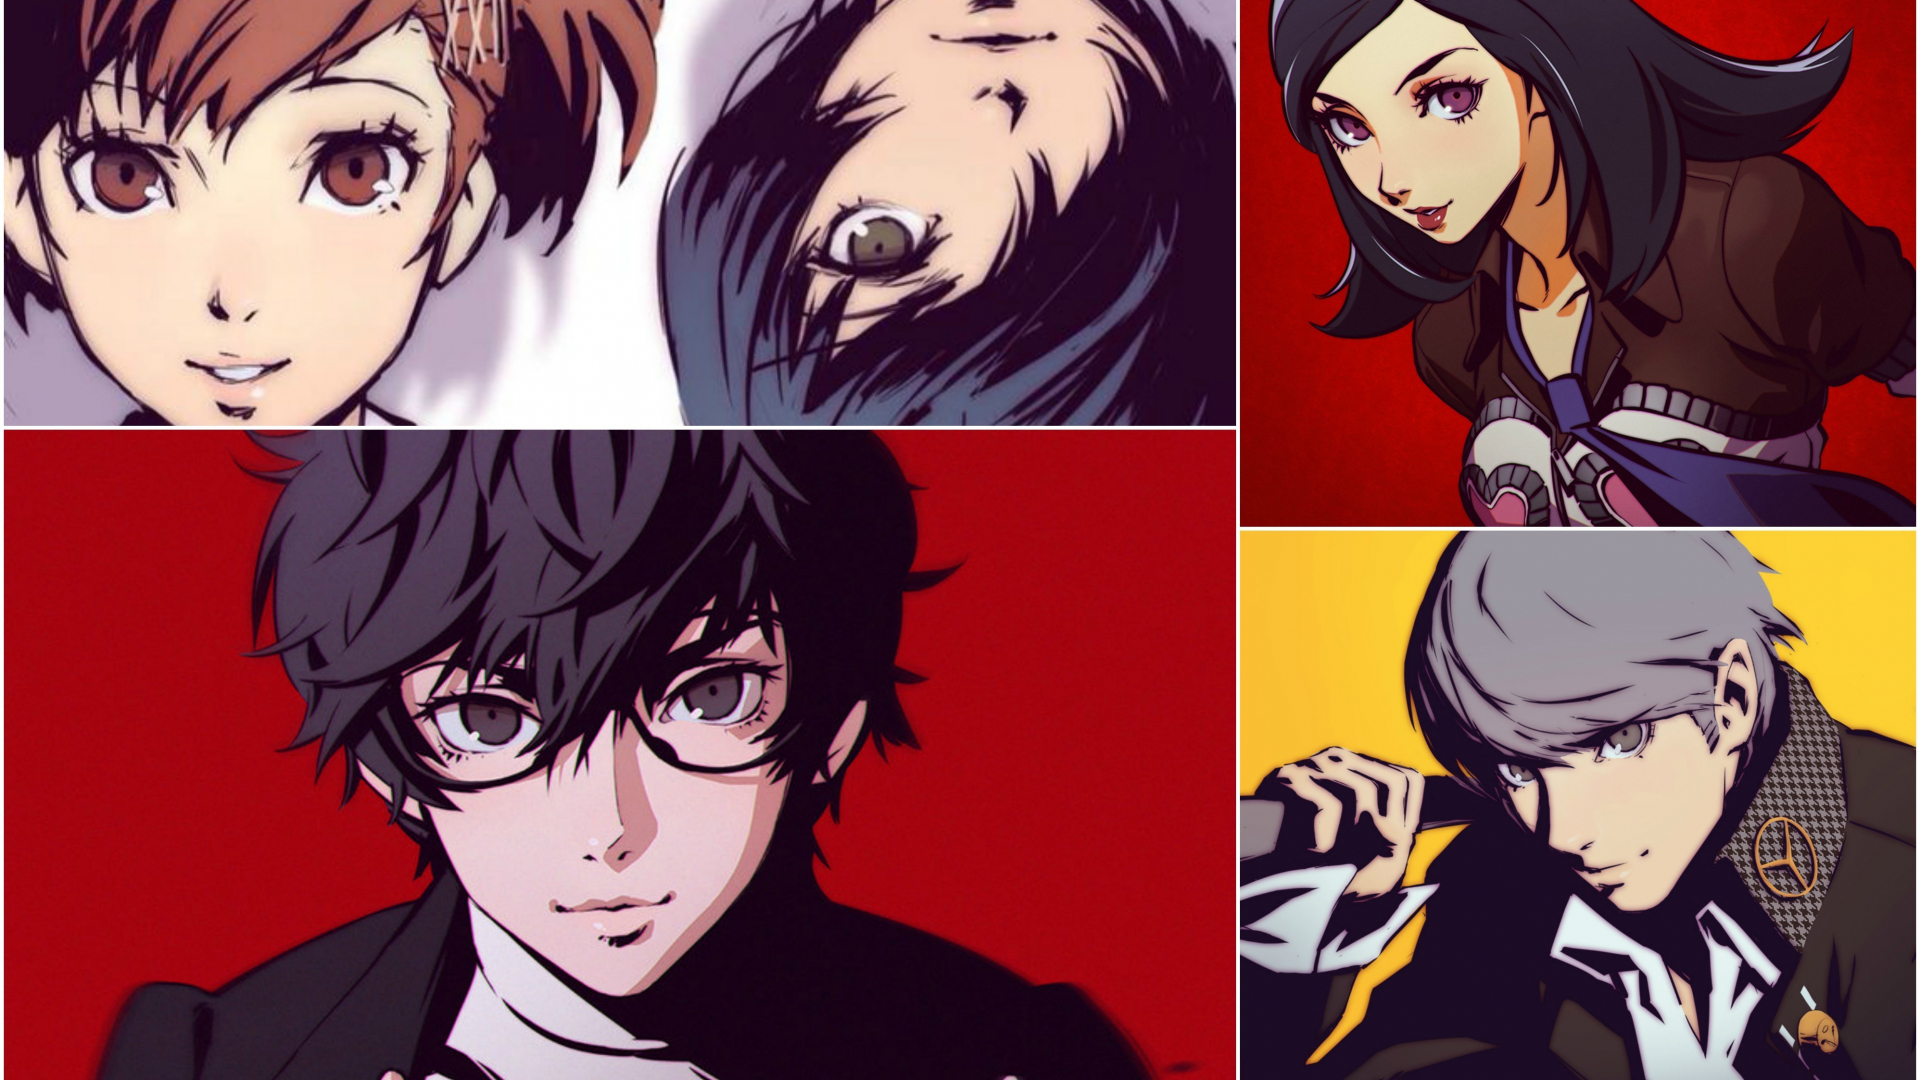 Download 1920x1080 Wallpaper Persona 5, Anime, Video Game, 4k, Full Hd ...